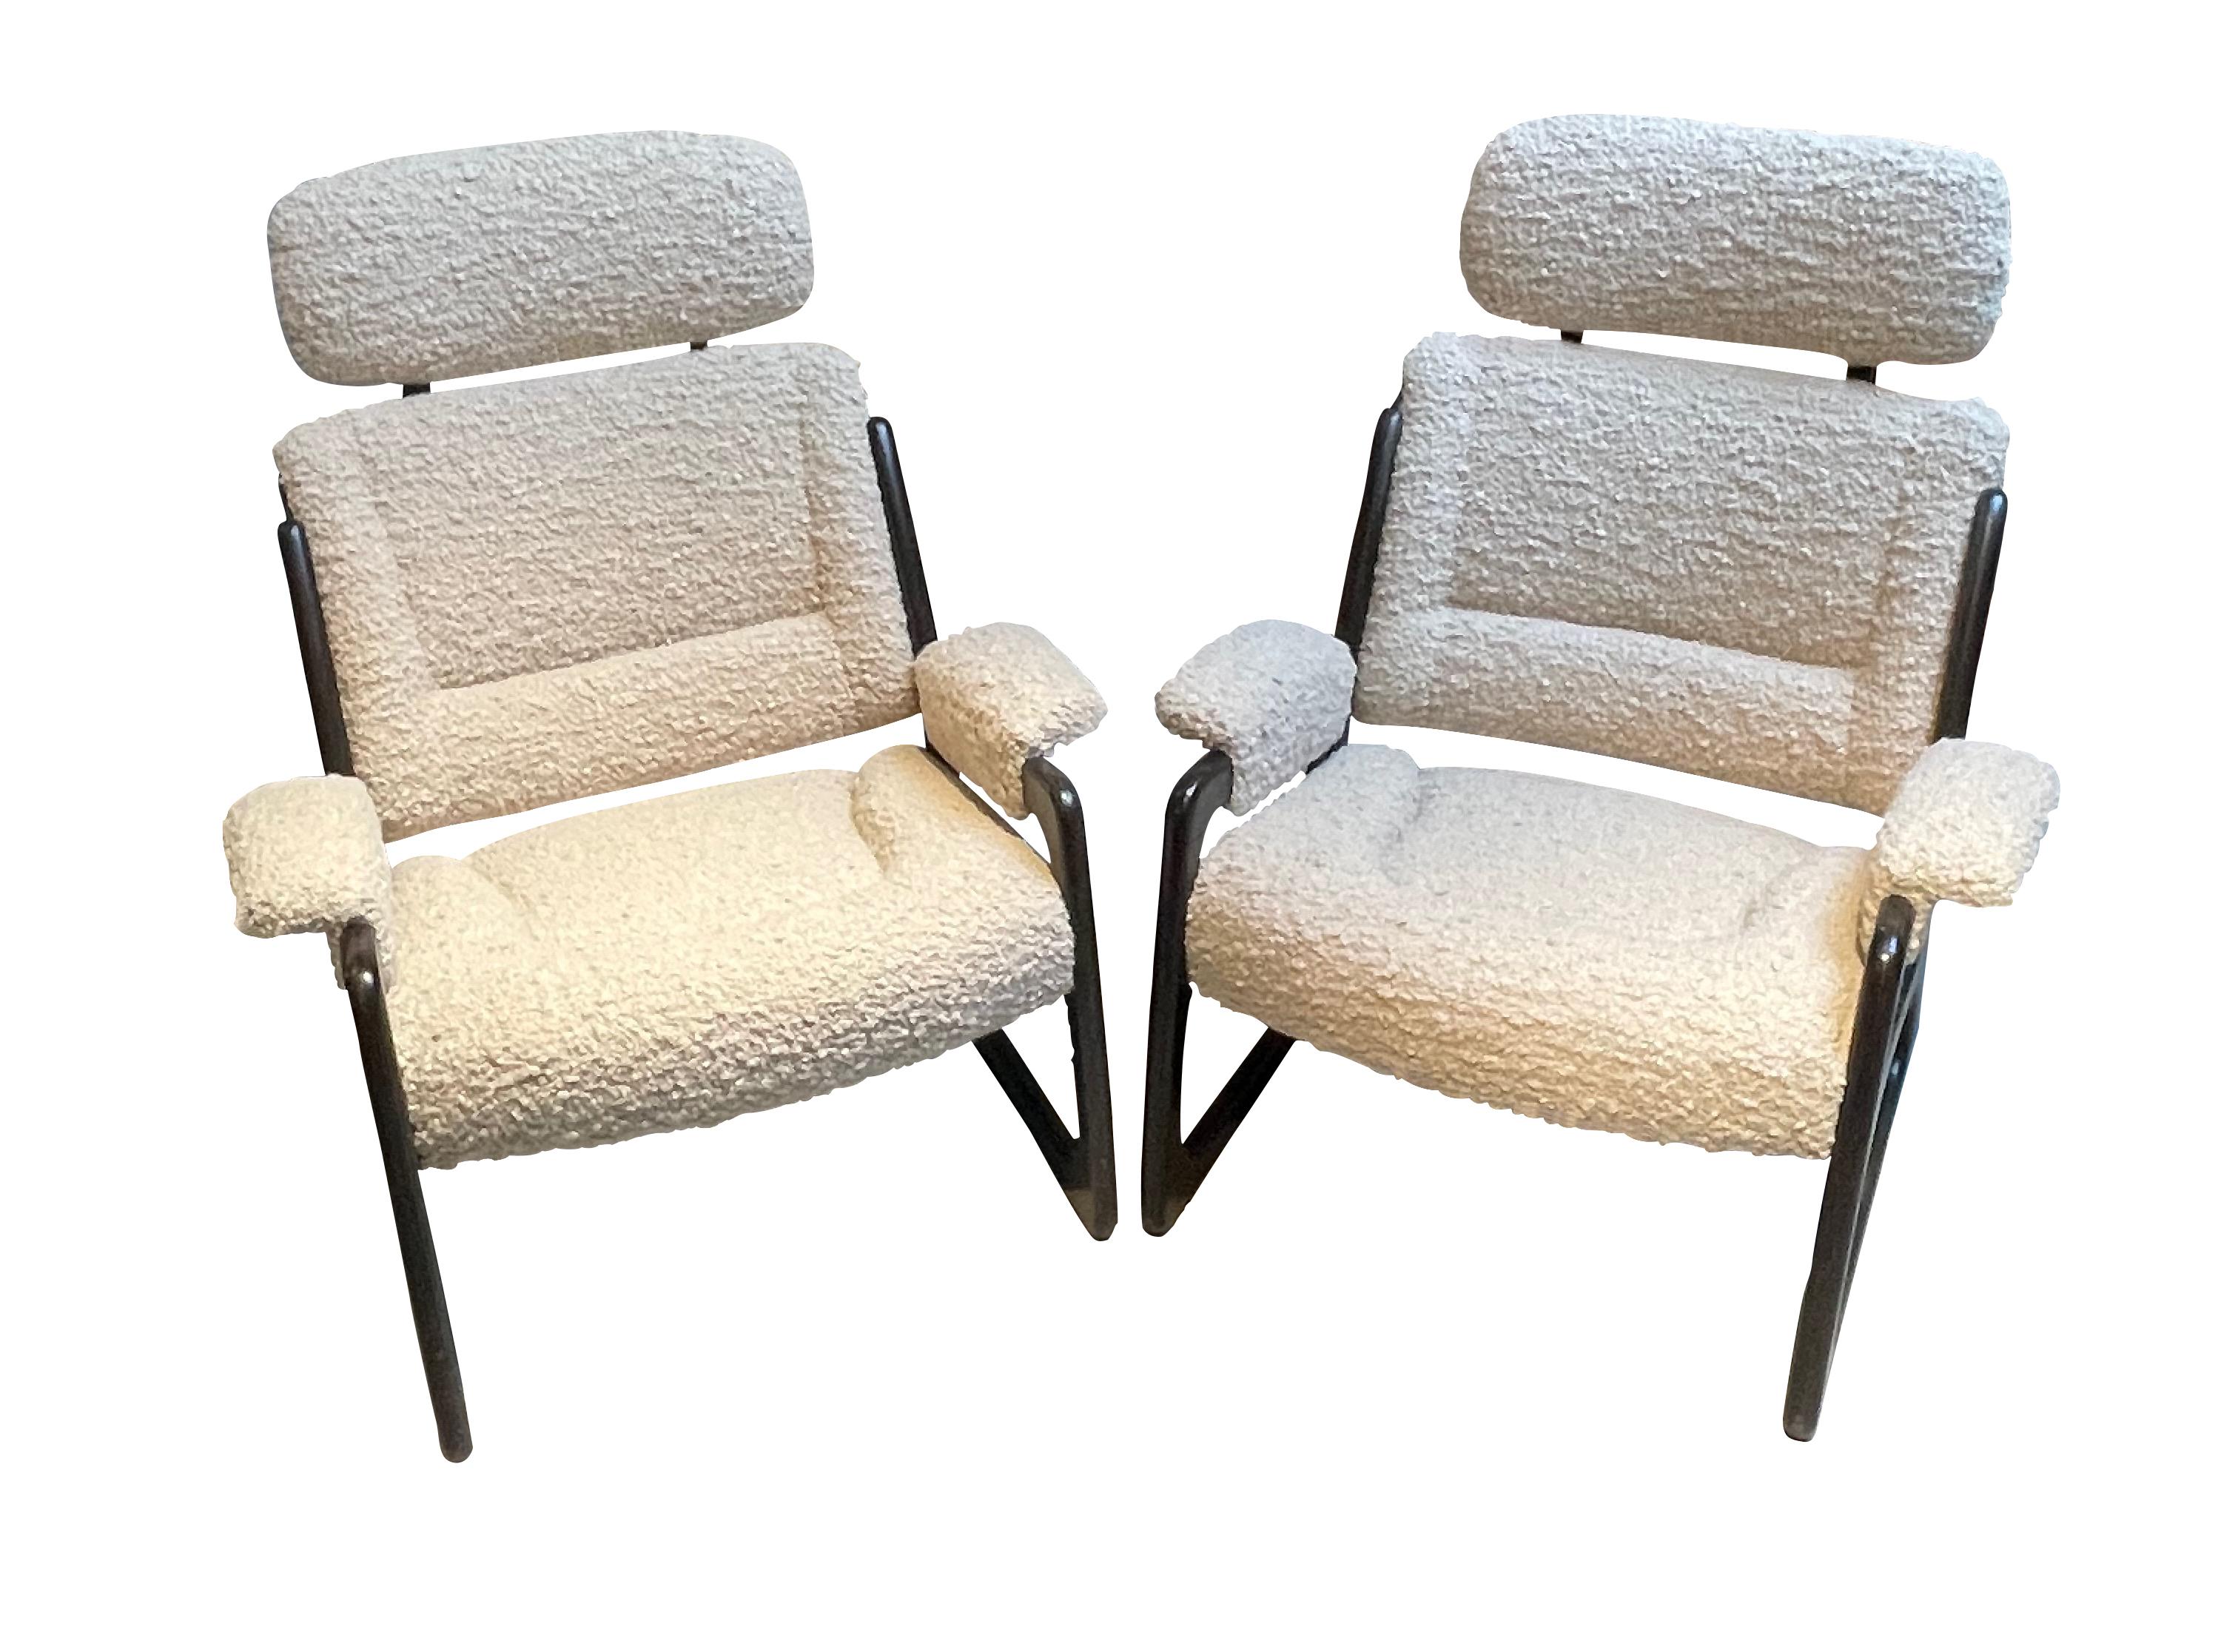 1960's Italian pair very comfortable side chairs with ebonized wood frame.
Removable headrest.
Newly reupholstered in white boucle.
Decorative recessed stitch details on back and seat.
Padded arm rests.
